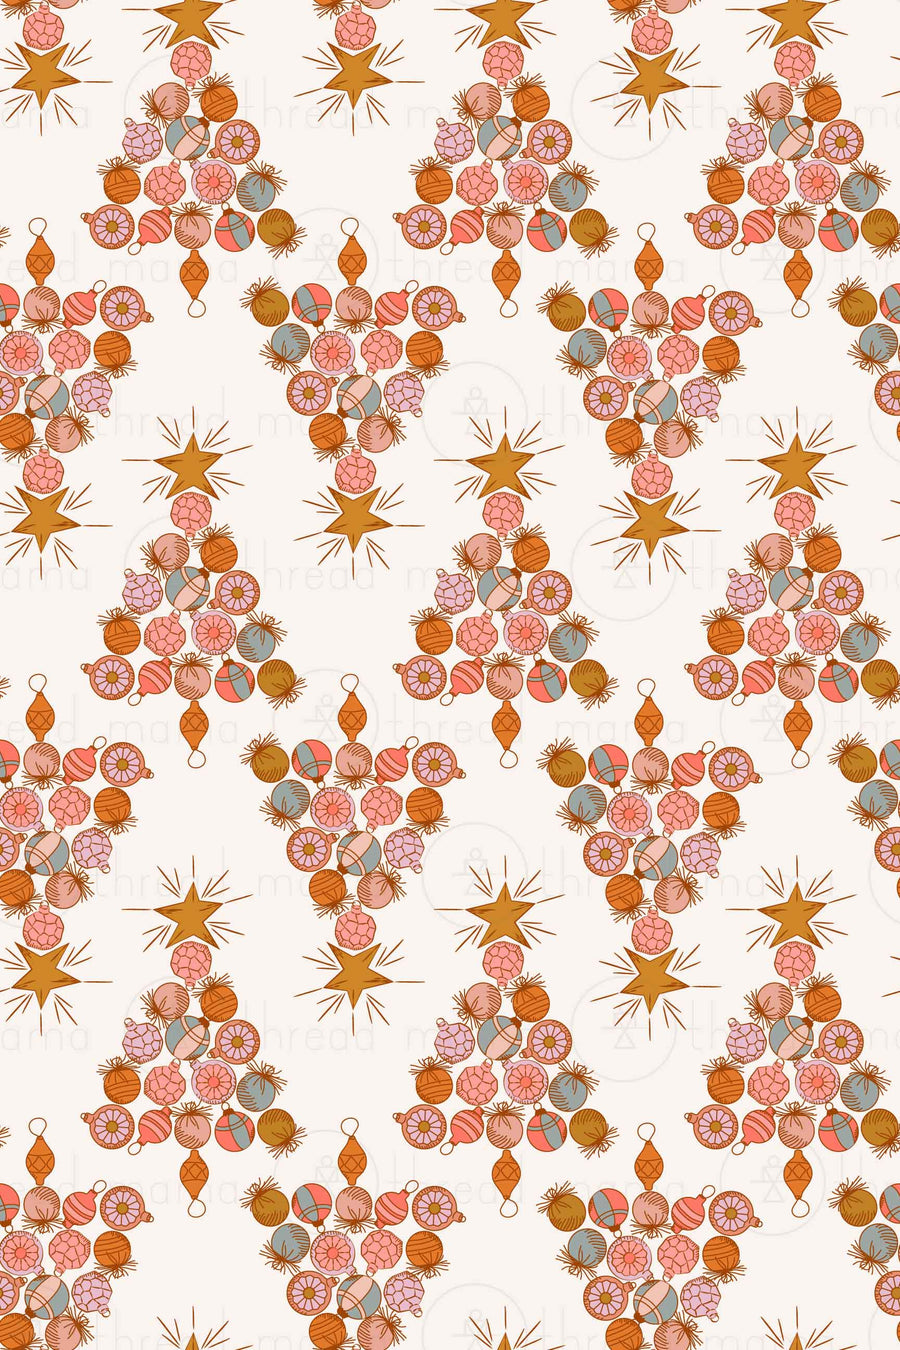 Repeating Pattern 157 (Seamless)